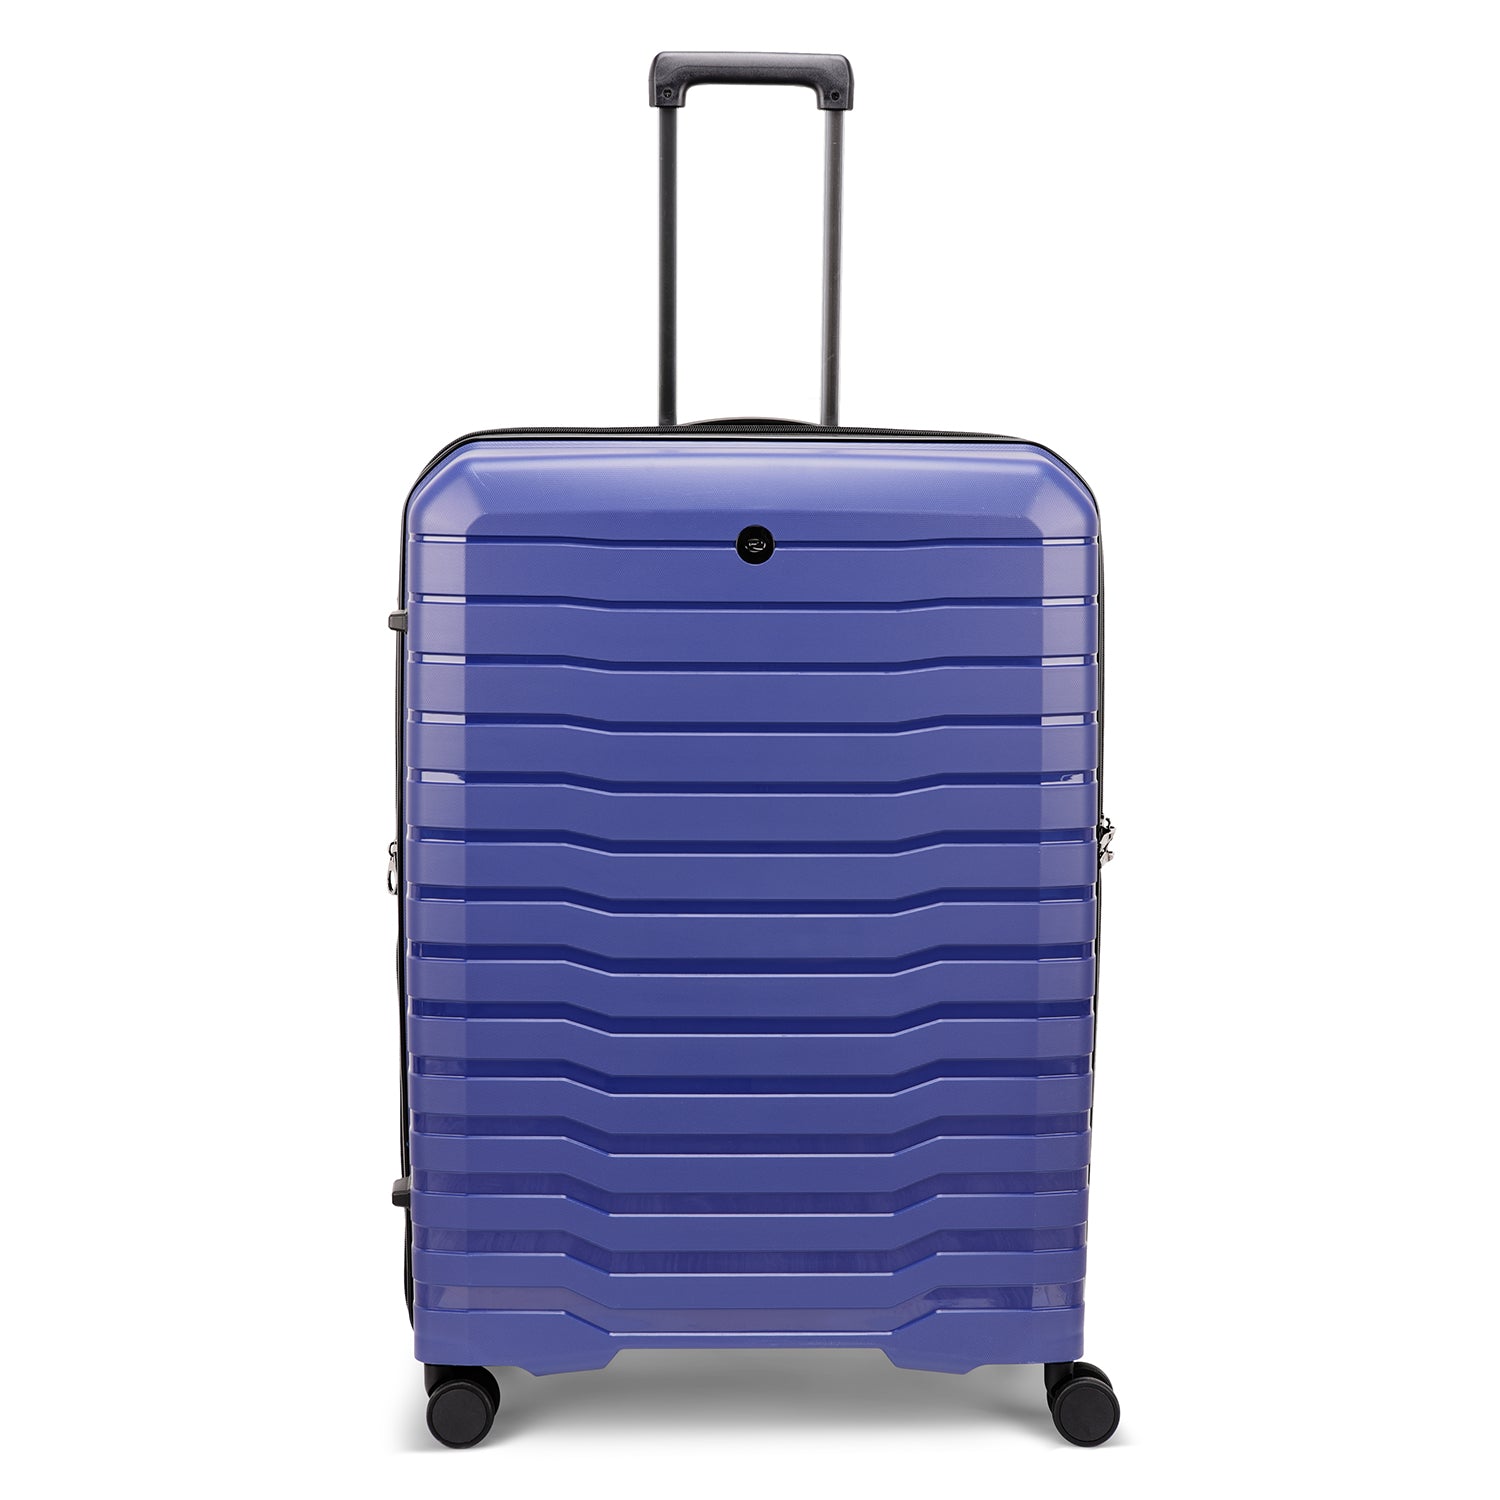 Echolac Lordnorth 77cm Hardcase Expandable 4 Double Wheel Check-In Luggage Trolley Turkish Tile - PPT008 - 28 TURKISH TILE